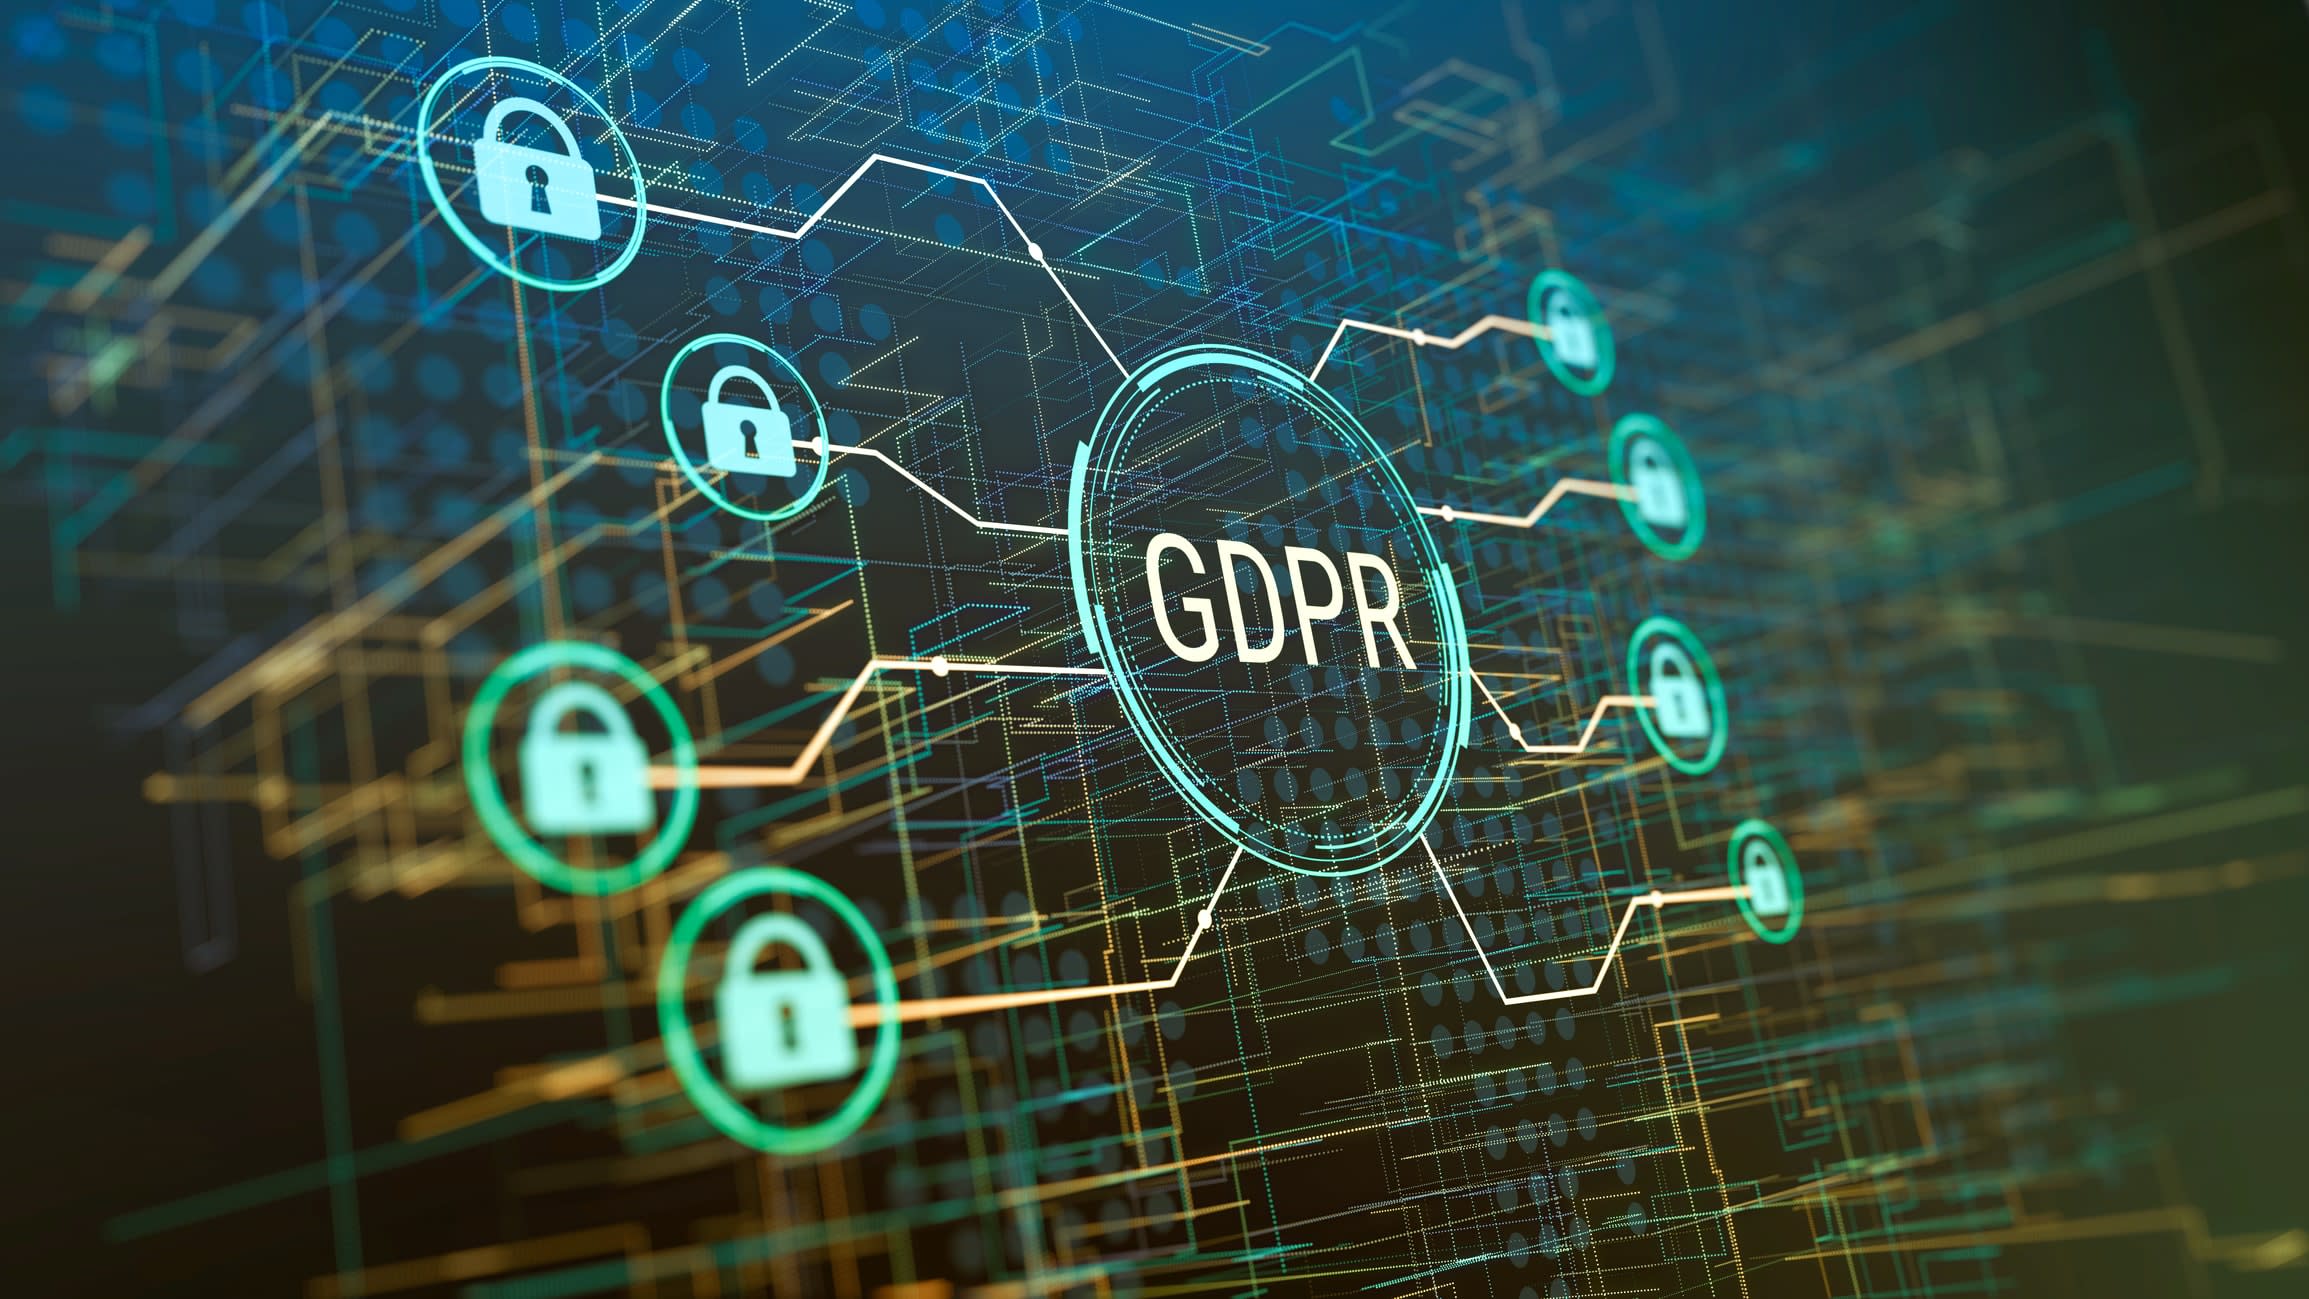 General Data Protection Regulation (GDPR) concept, with abstract computer network background 